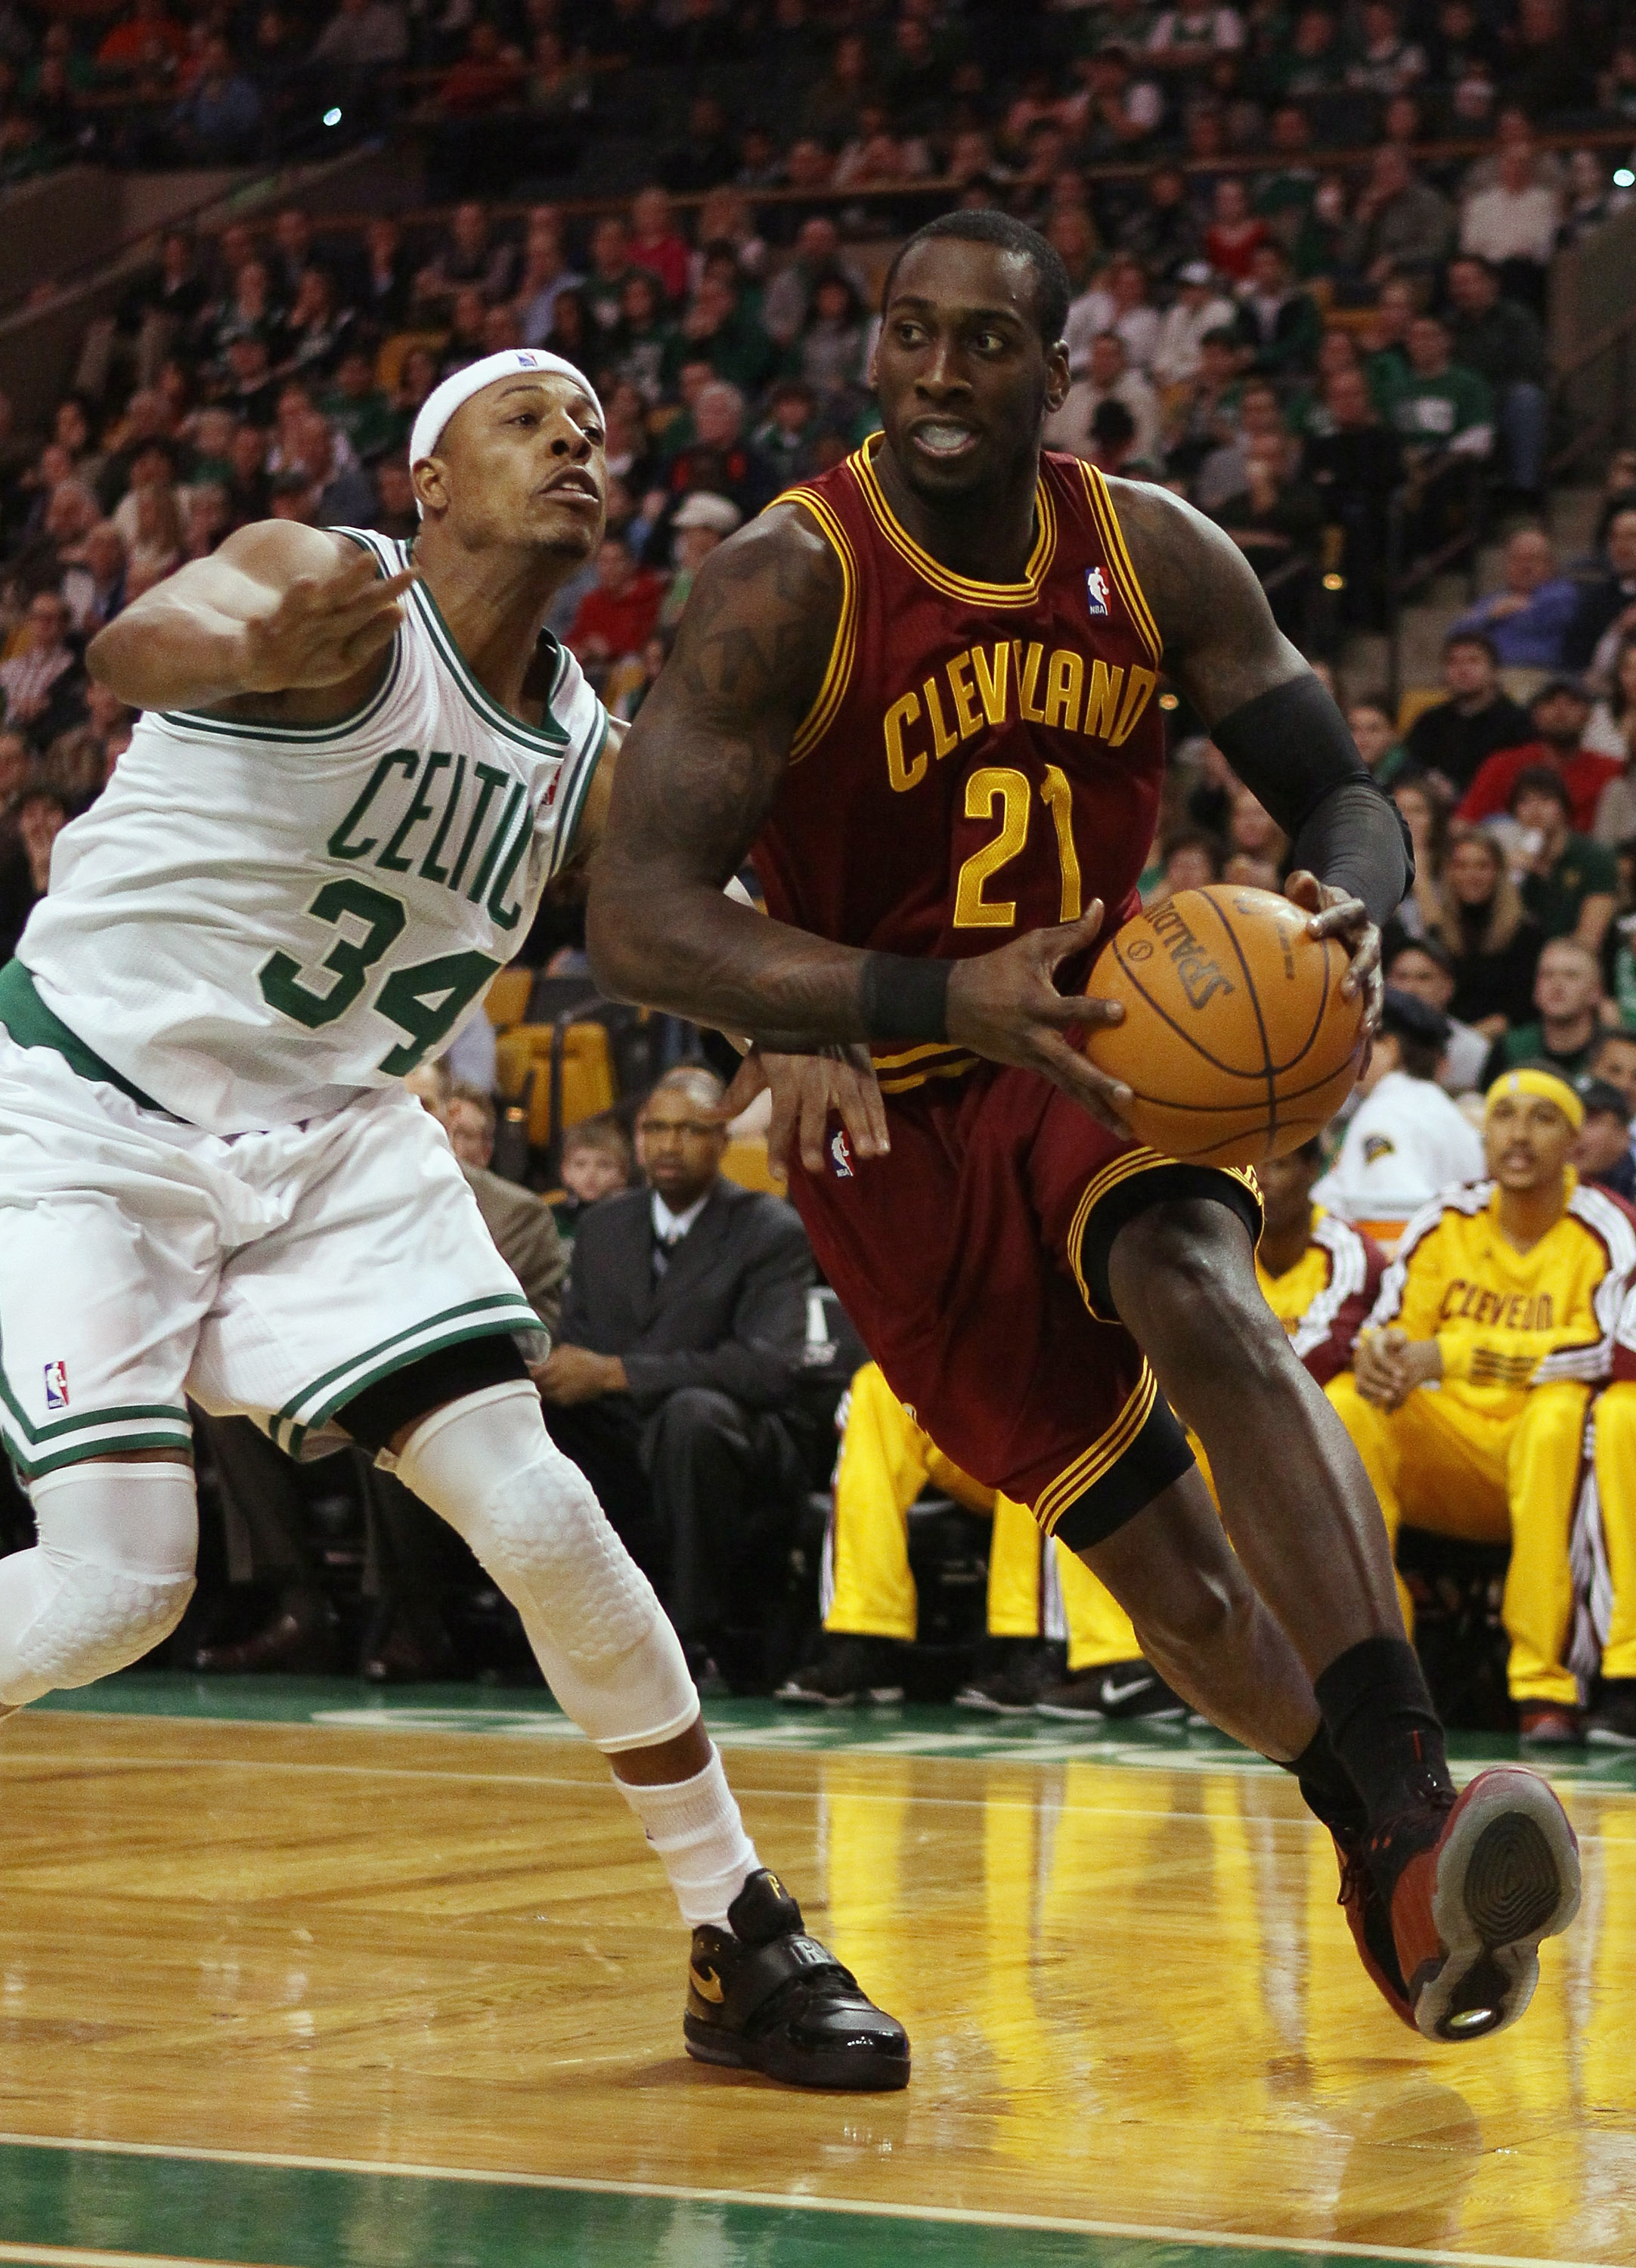 BOSTON, MA - JANUARY 25:  J.J. Hickson #21 of the of the Cleveland Cavaliers heads for the net as Paul Pierce #34 of the Boston Celtics defends on January 25, 2011 at the TD Garden in Boston, Massachusetts.   NOTE TO USER: User expressly acknowledges and